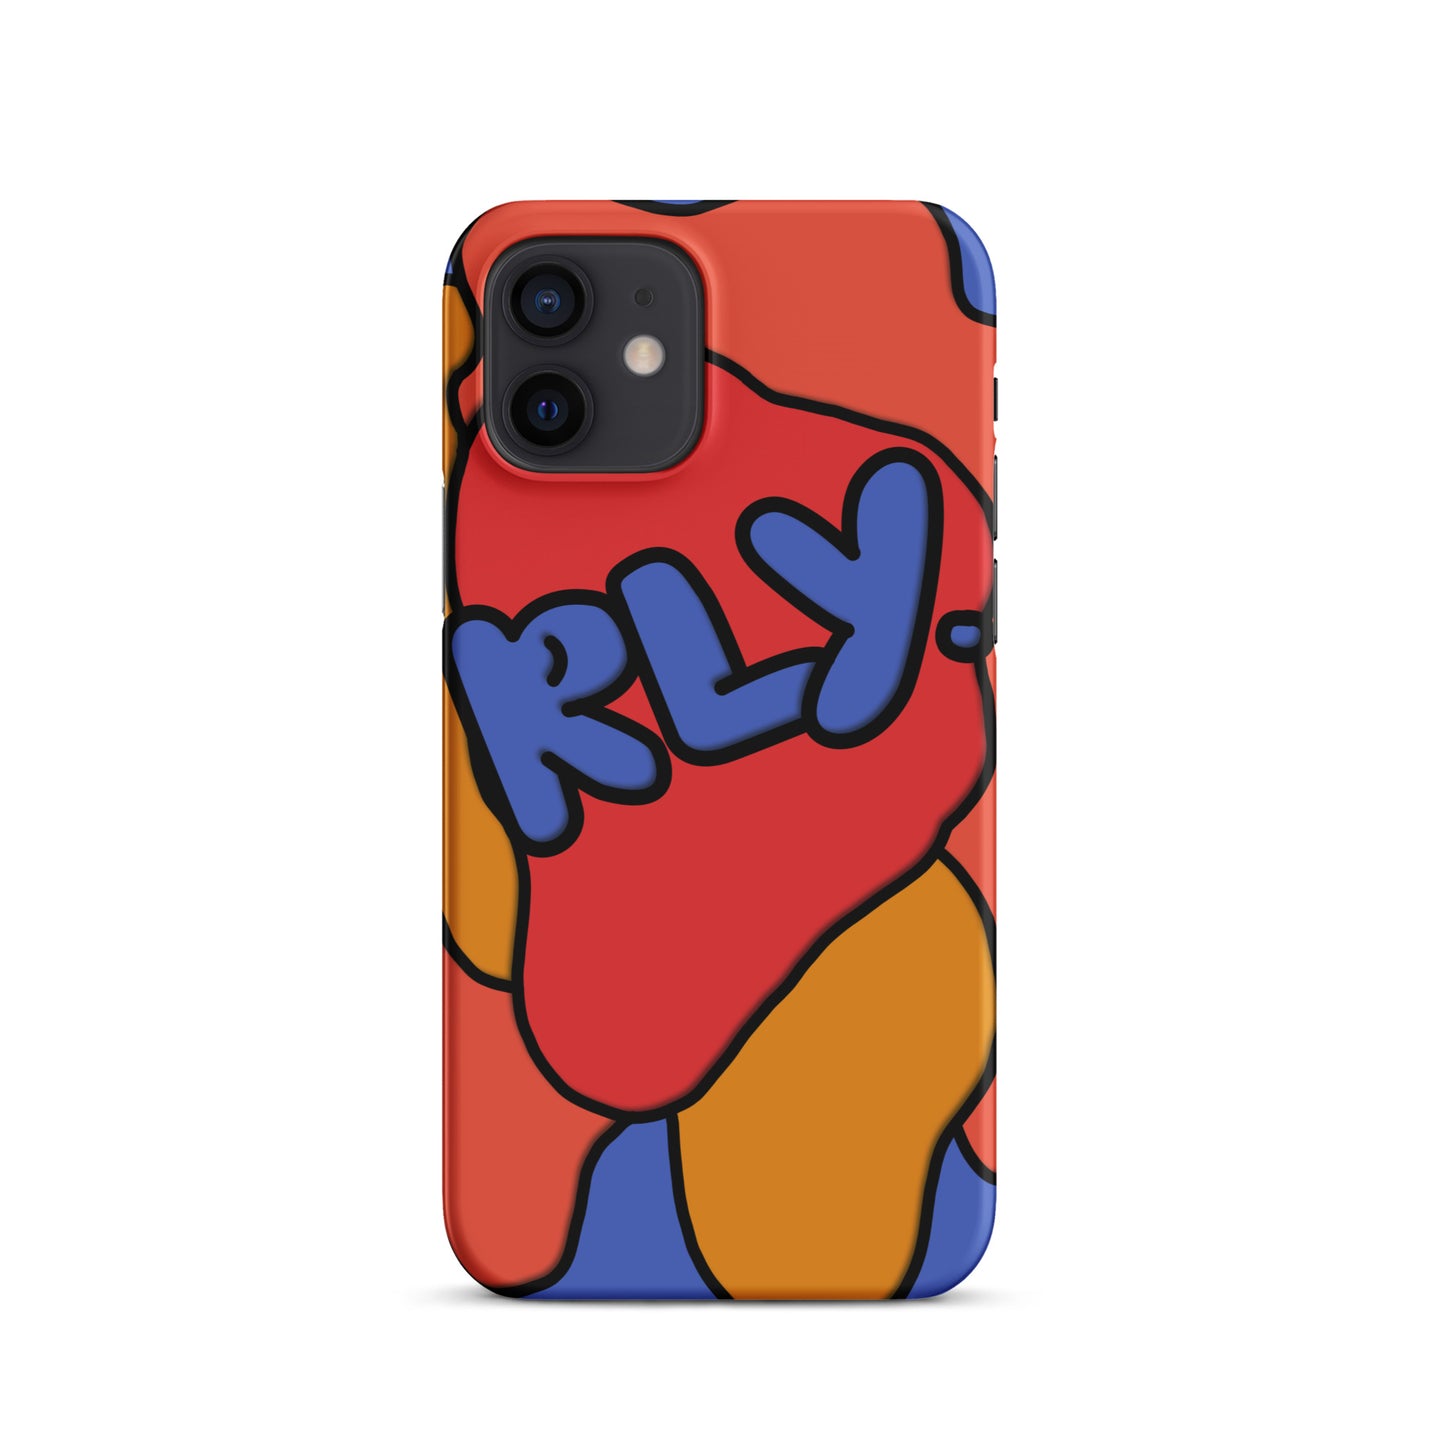 RLY iPhone CASE